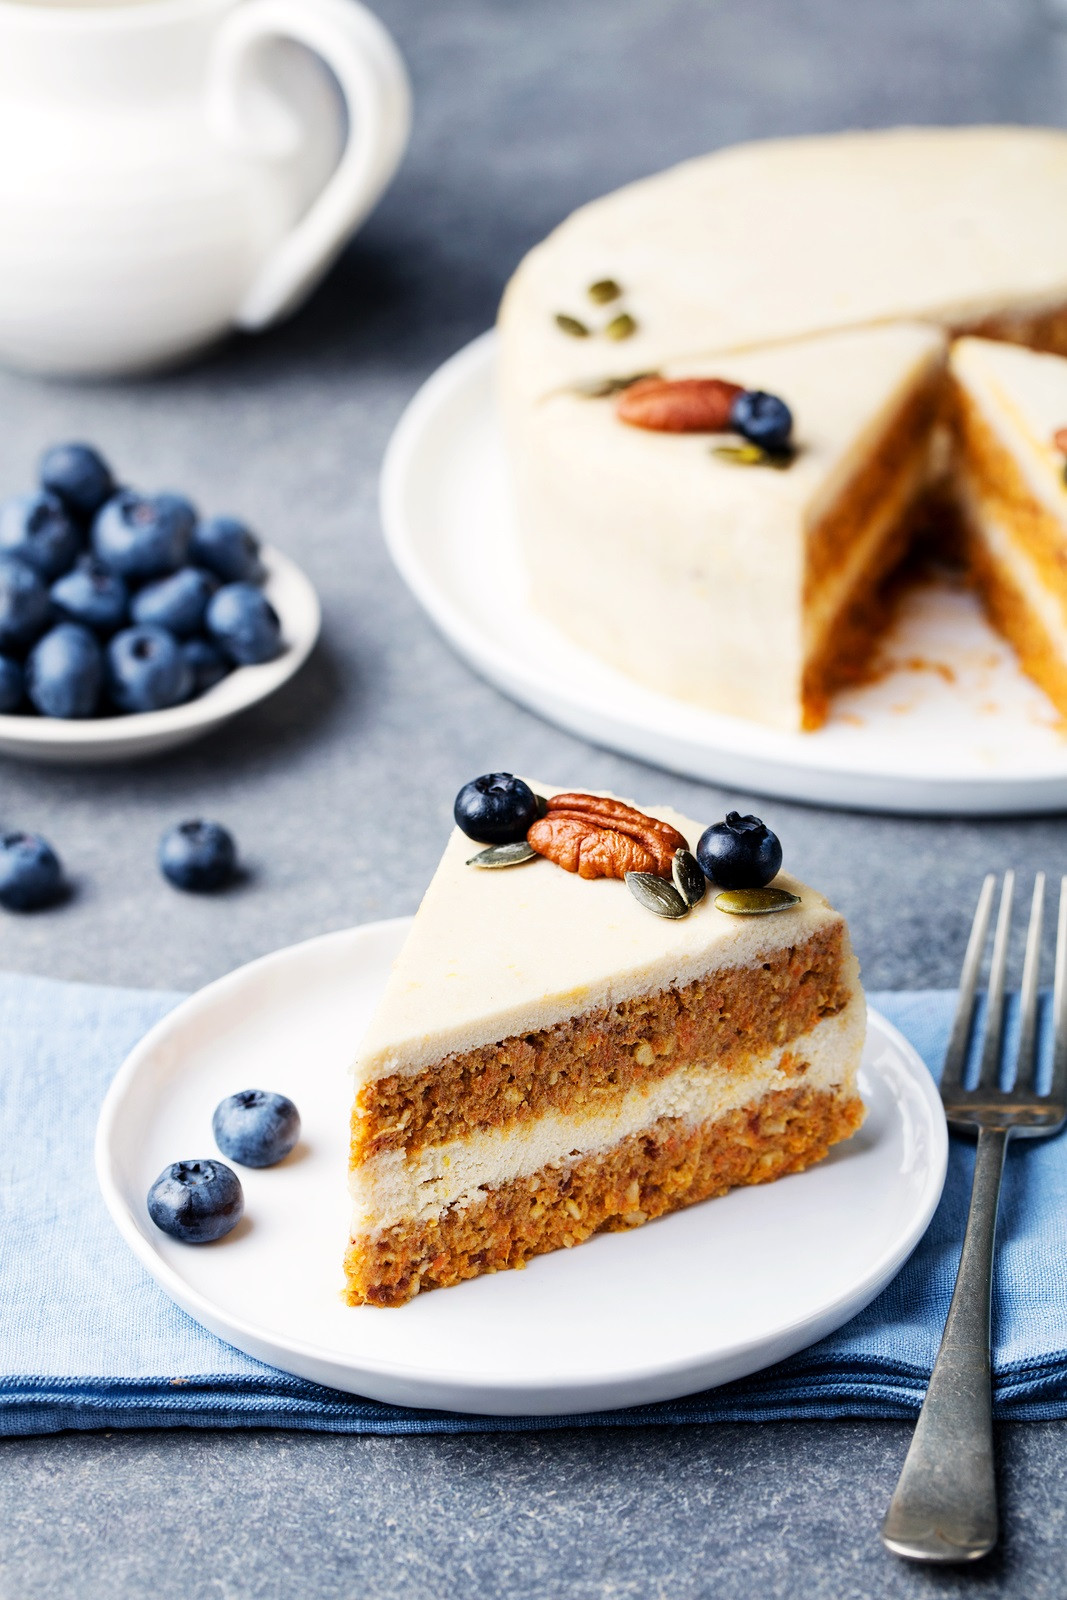 Dairy Free Carrot Cake Frosting
 Raw Carrot Cake with Lemon Cashew Frosting Recipe Dairy Free